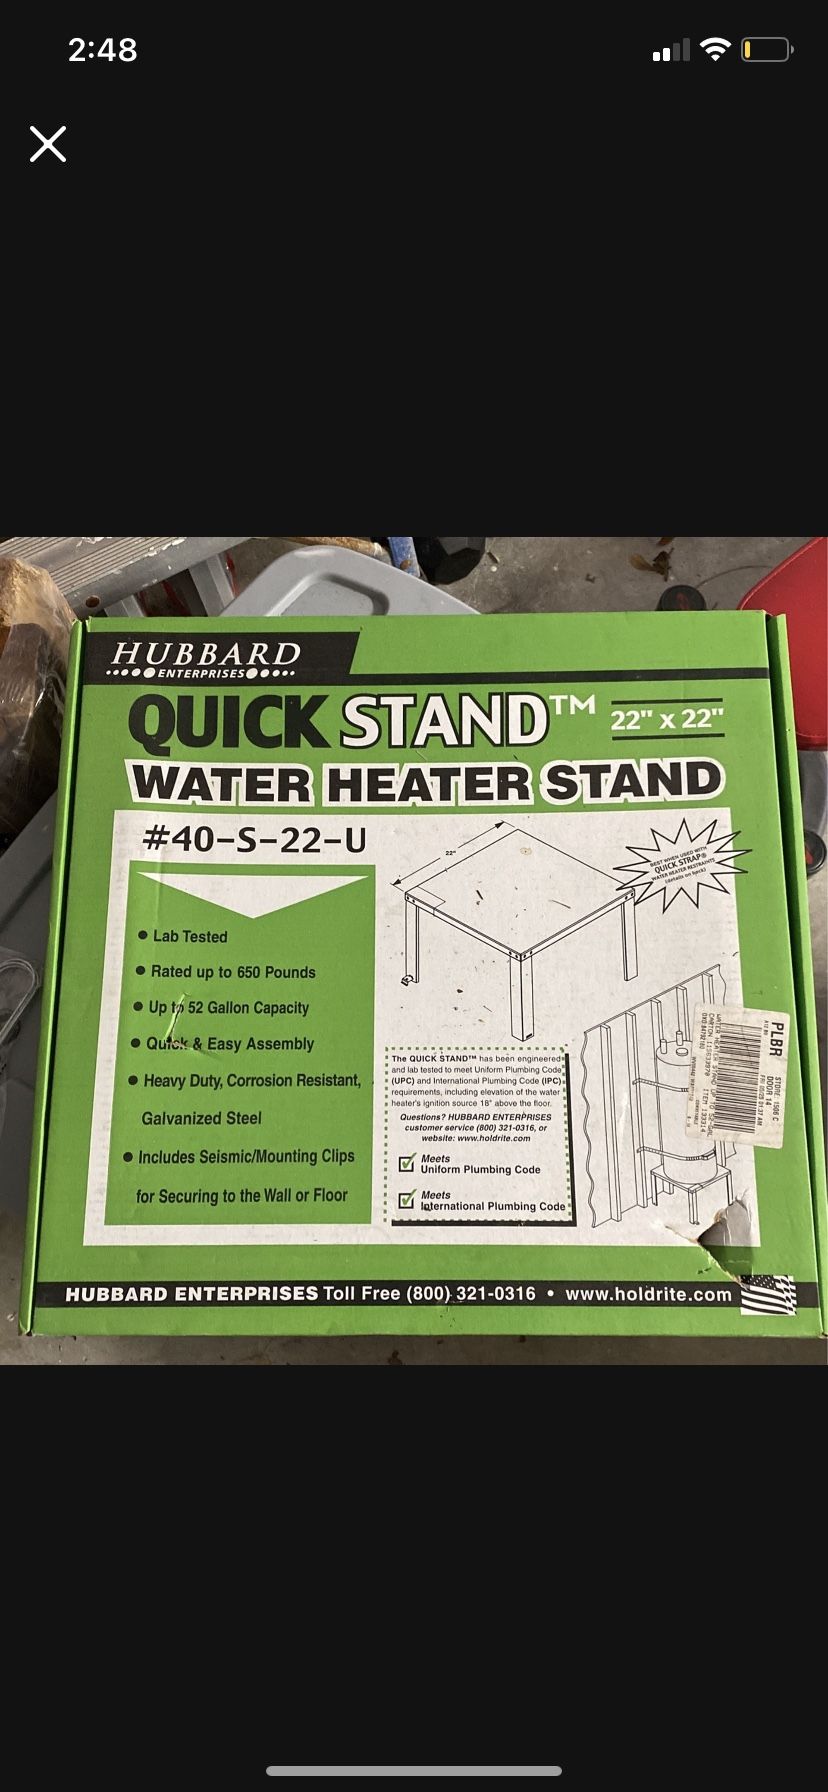 Quick Stand Water Heater Stand 